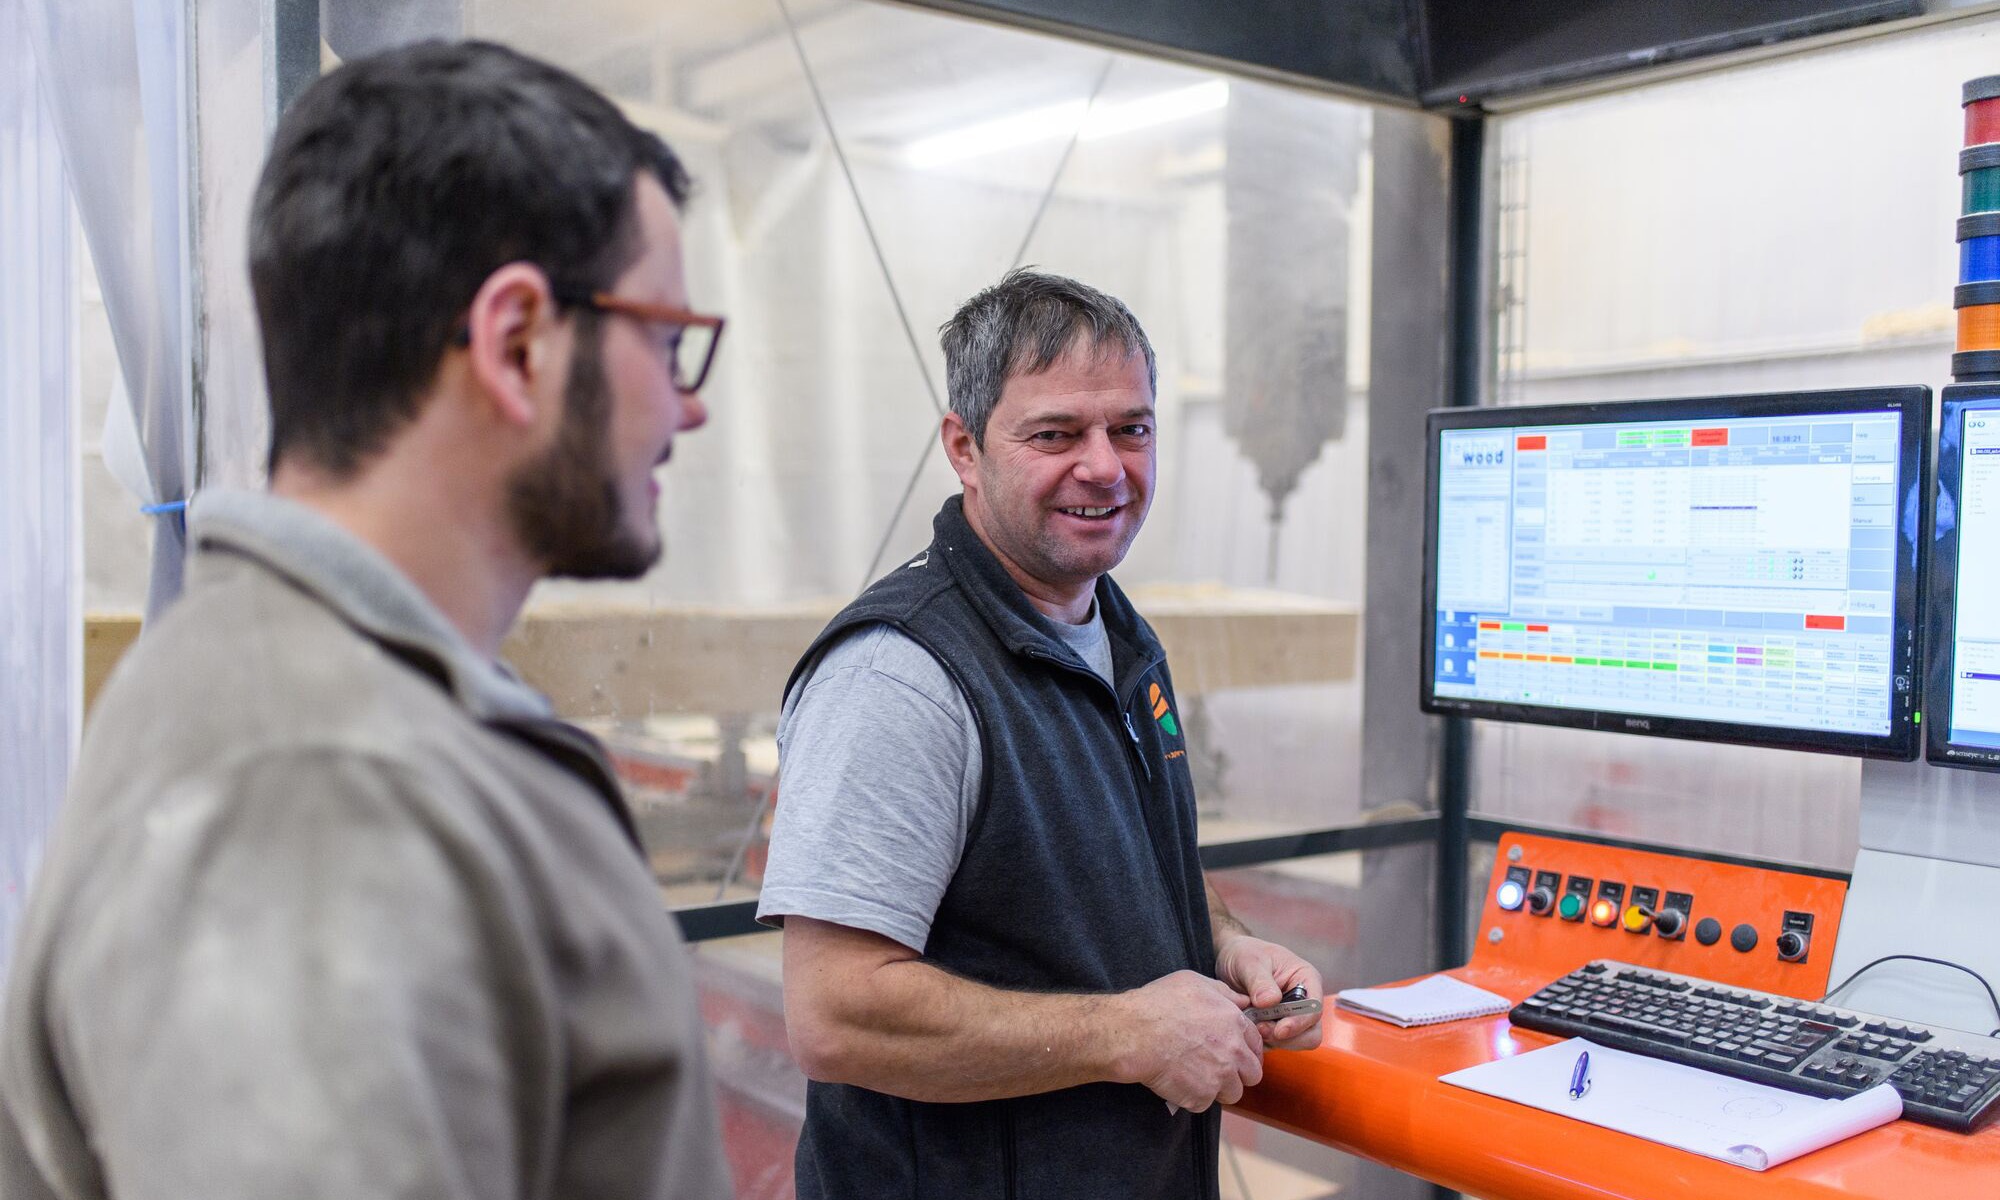 2 people at the controls of a CNC machine. 2 PCs are being used in the background. One person is looking at the camera, the other at the screen.